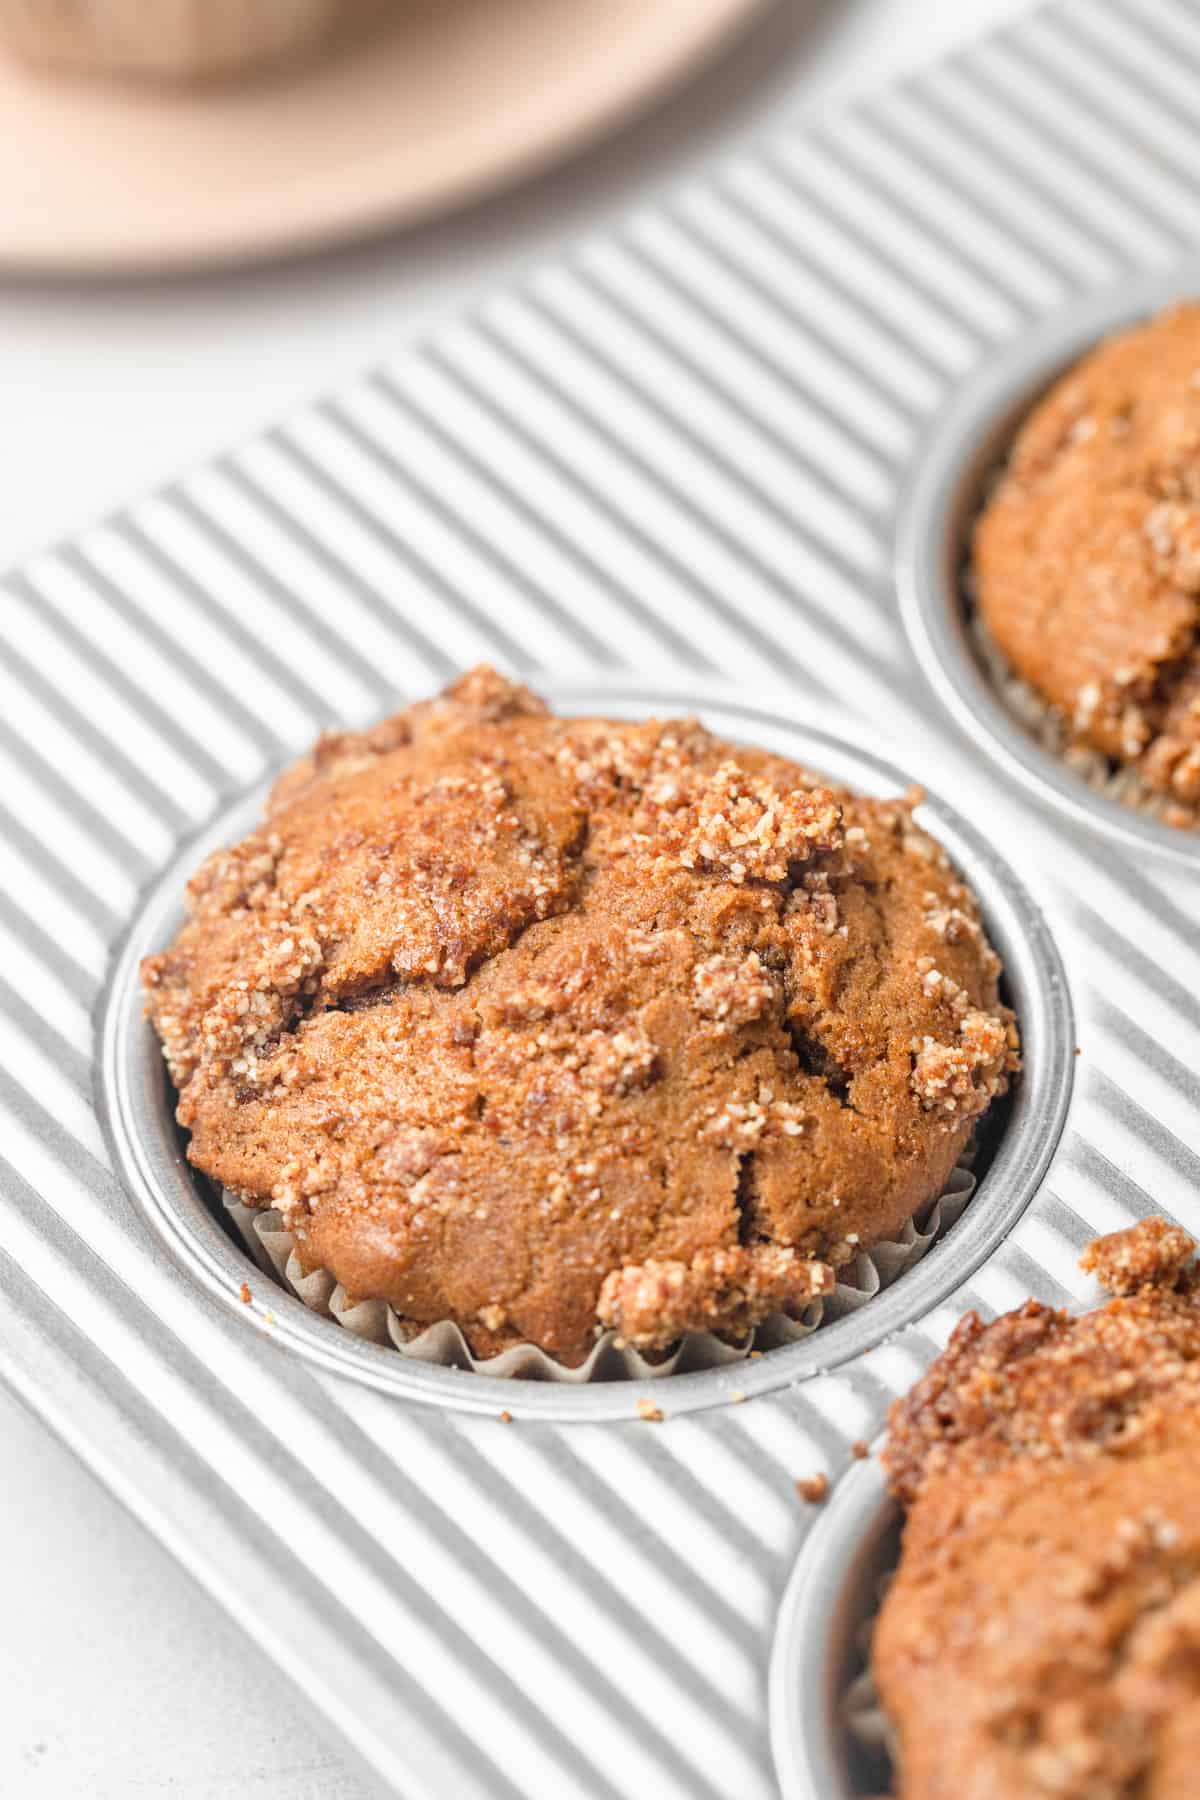 A close up of a muffin in a muffin pan.